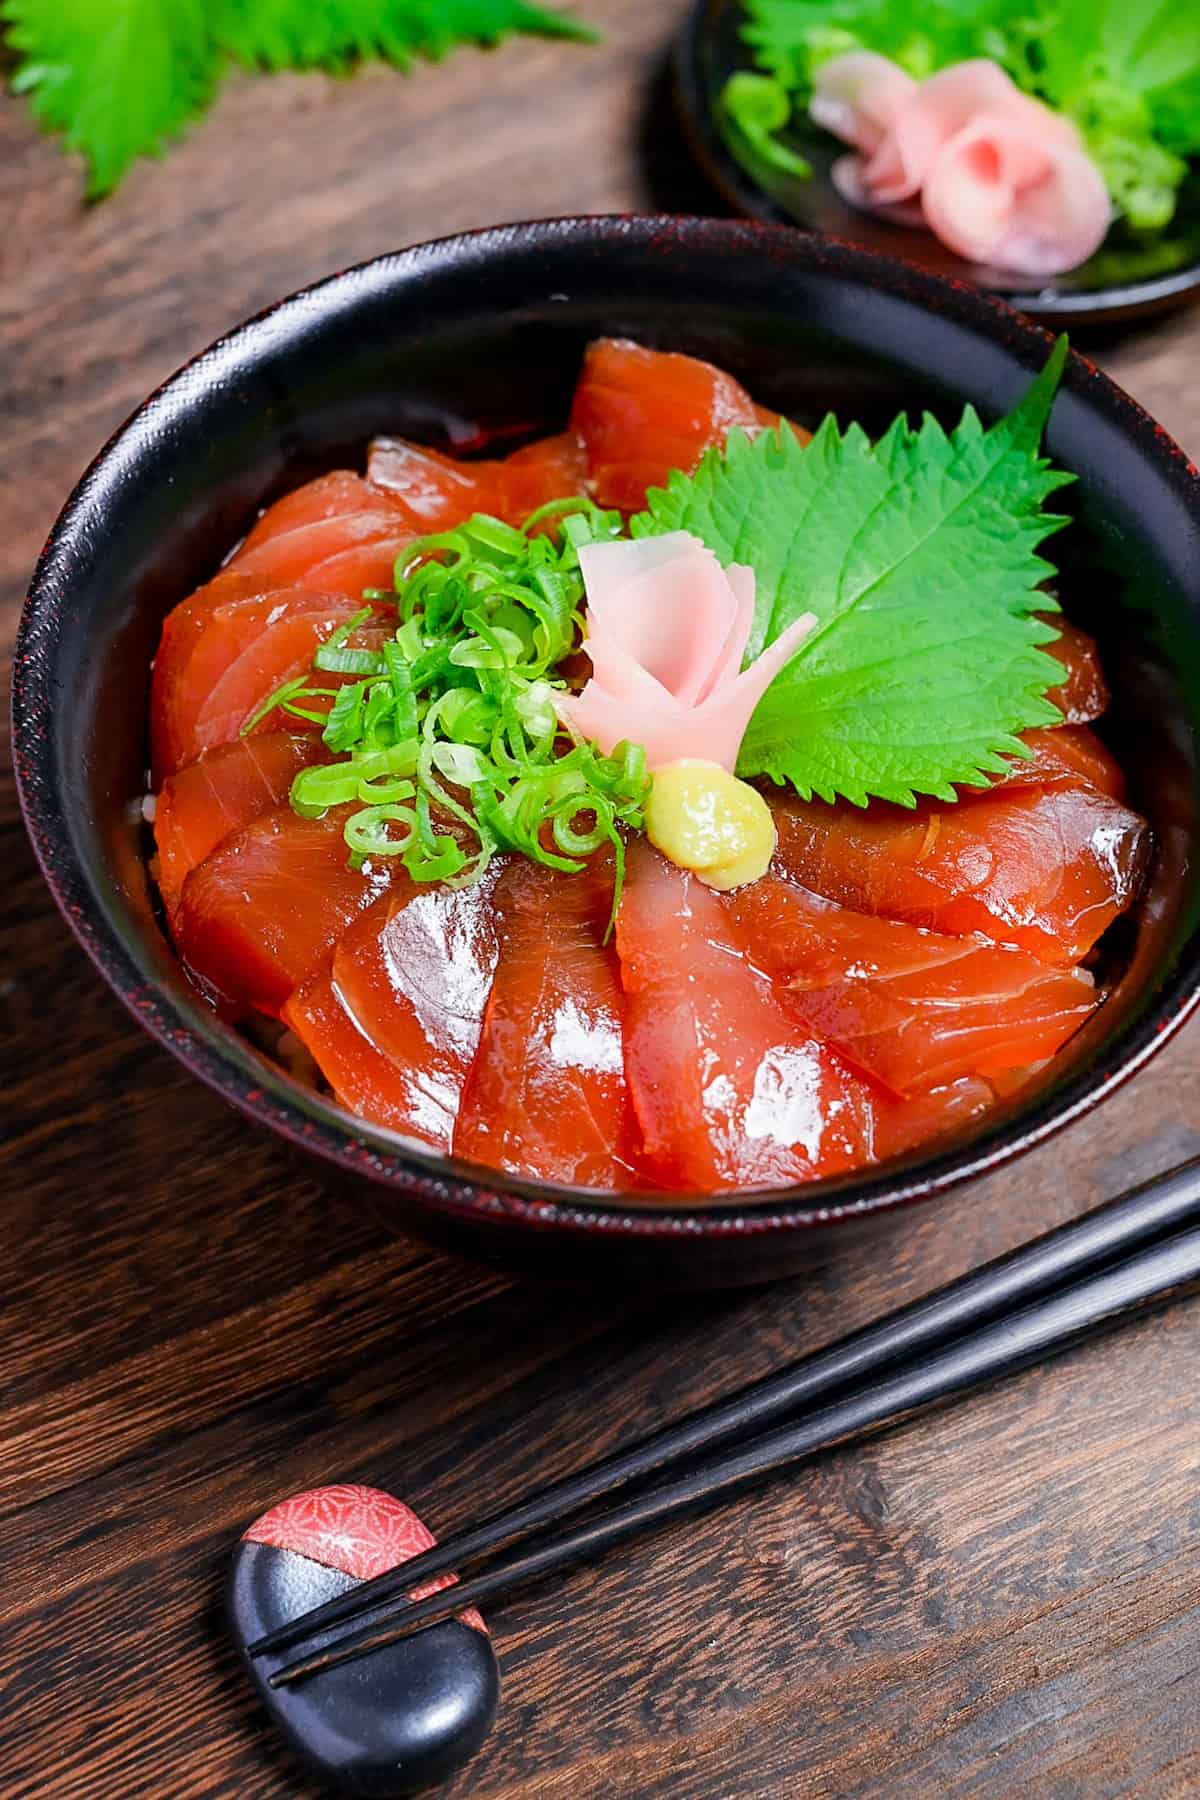 Tekkadon - vinegared rice topped with slices of fresh tuna sashimi, pickled ginger, wasabi, shiso and chopped spring onion in a black lacquerware bowl